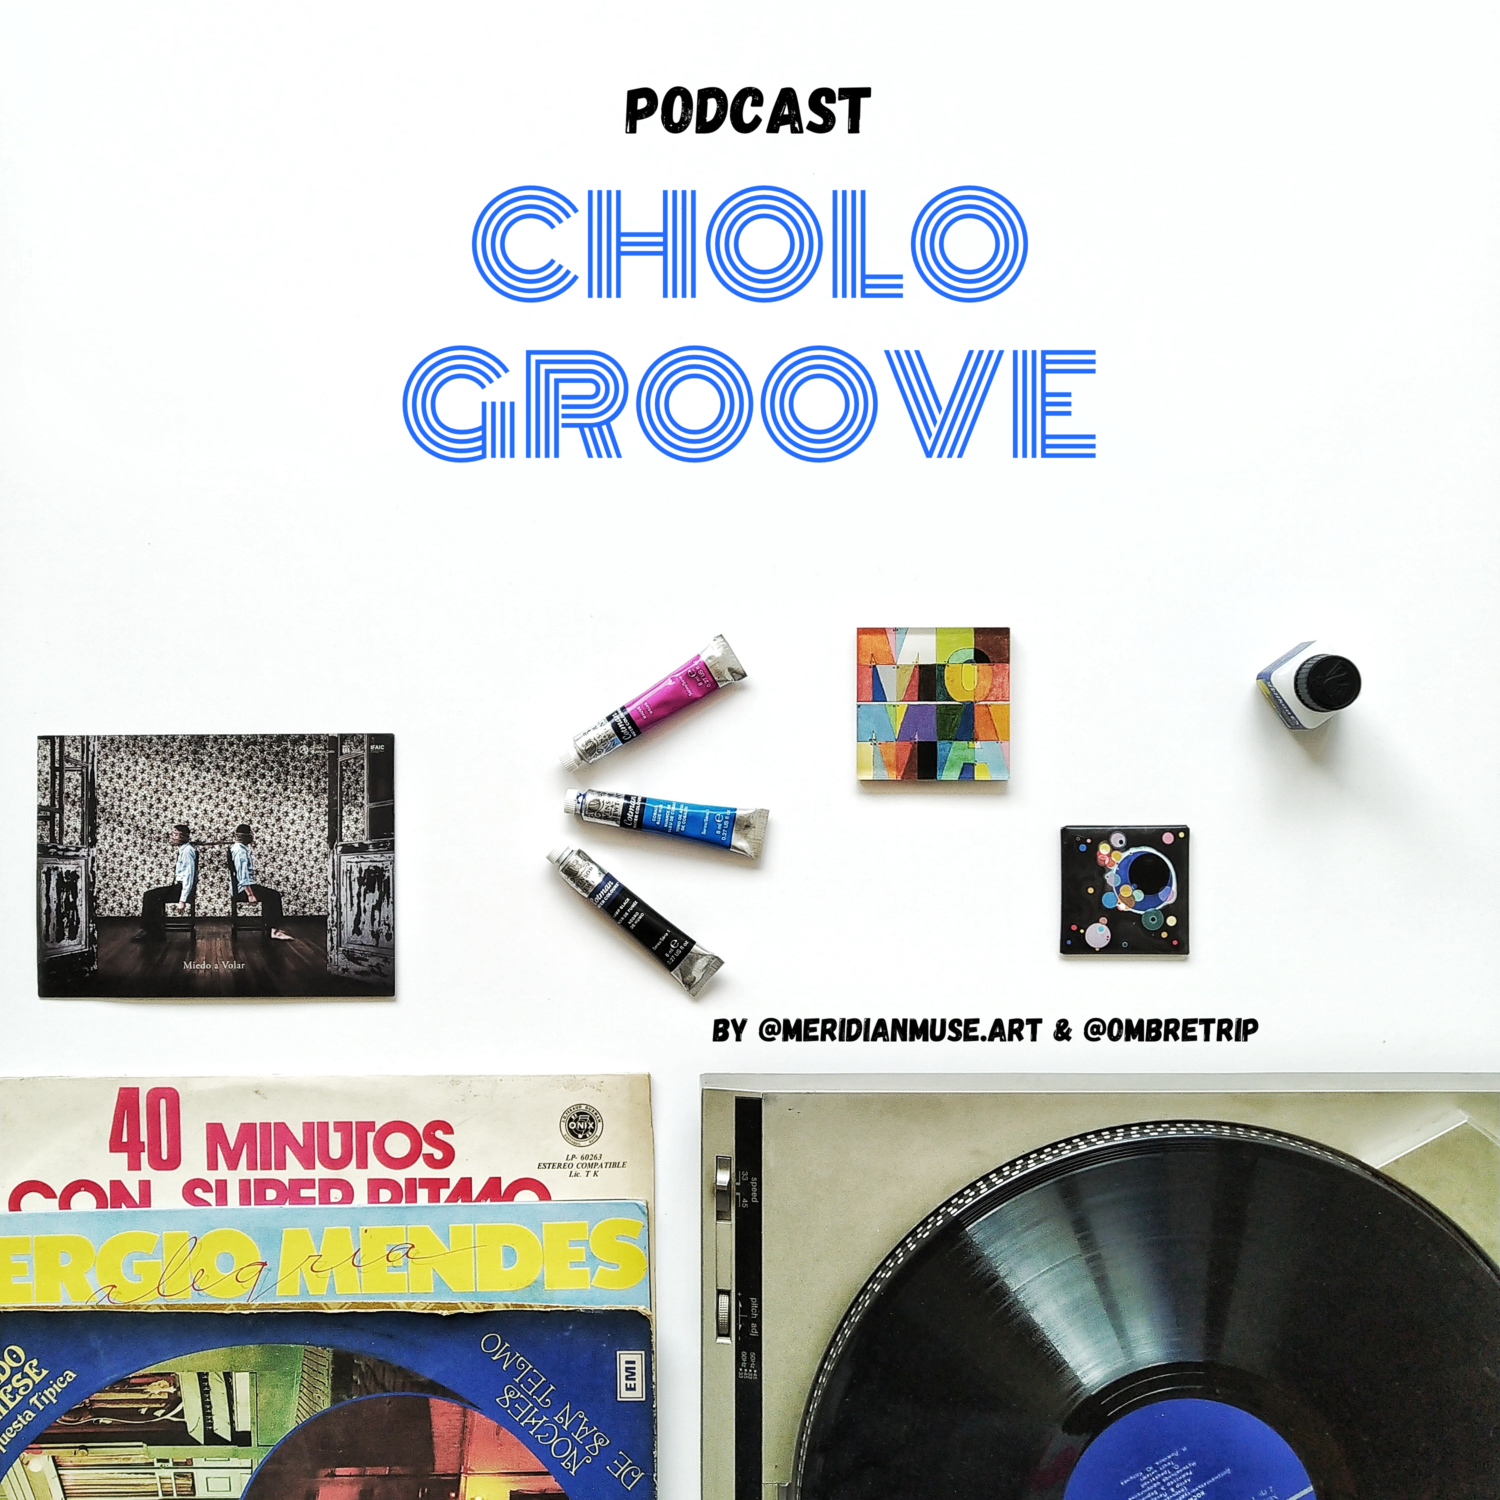 Cholo Groove Podcast